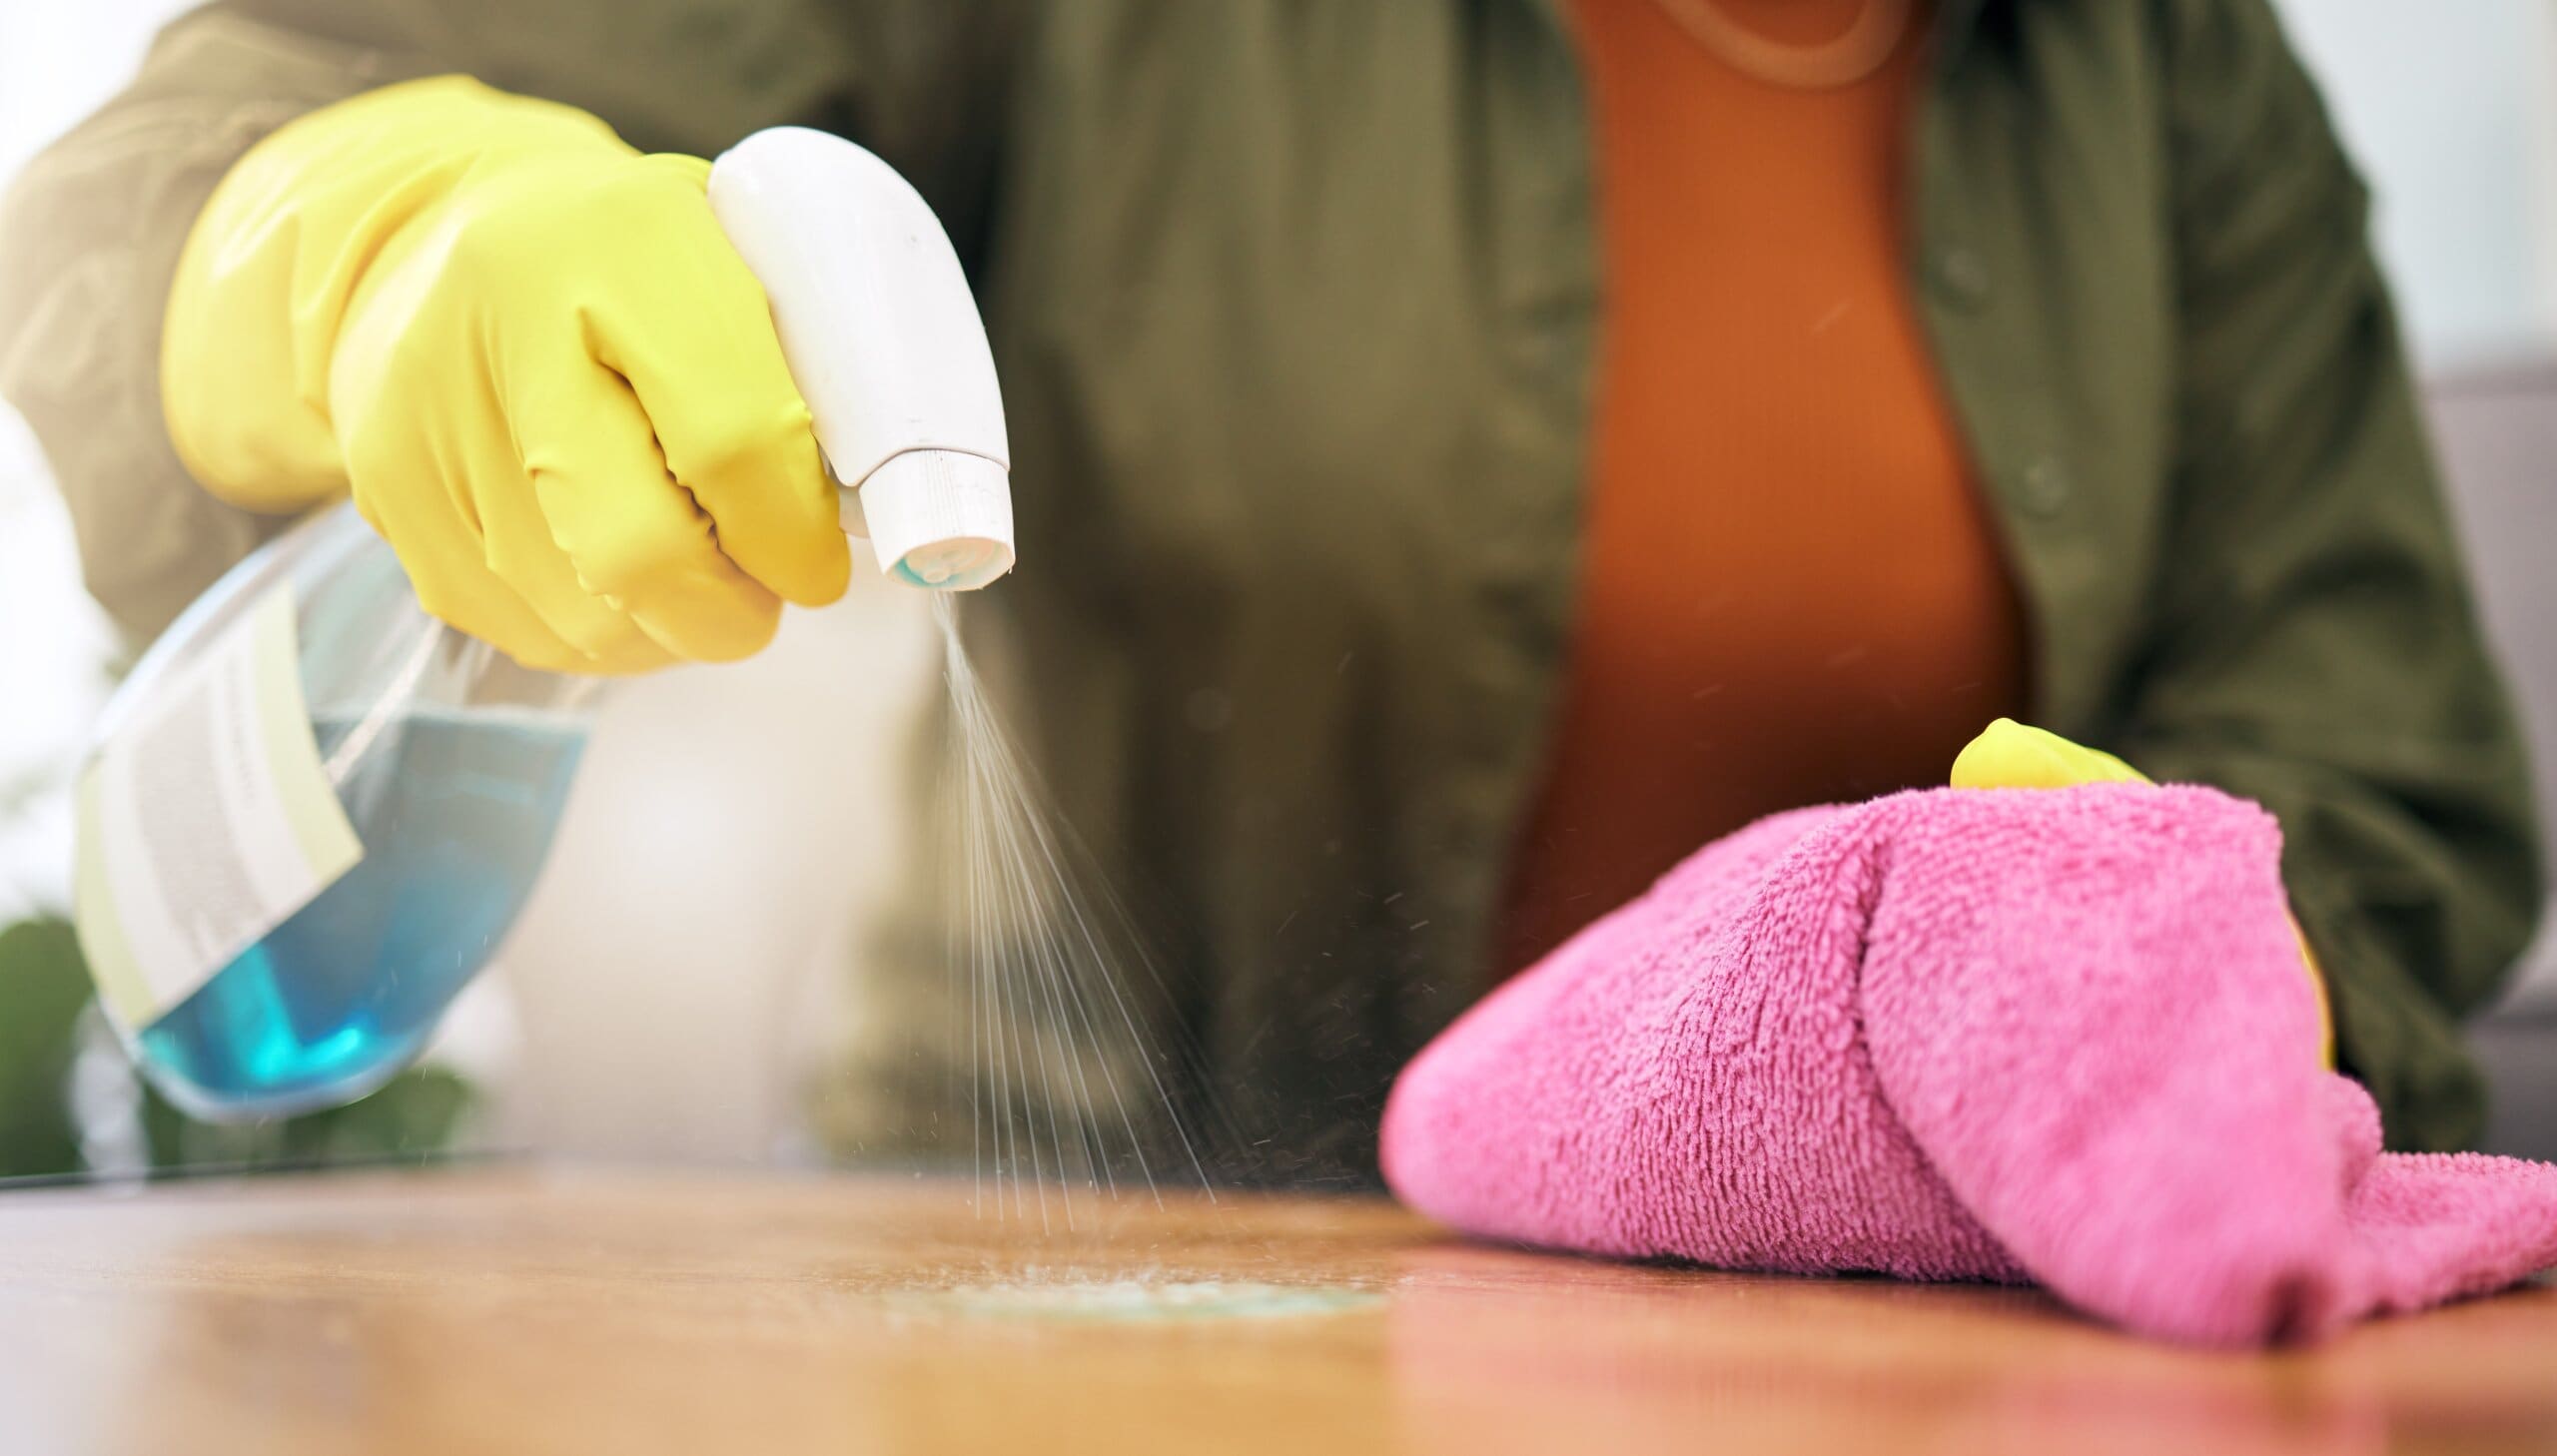 Close up of hands with gloves on holding a spray bottle, cleaning a wooden surface.